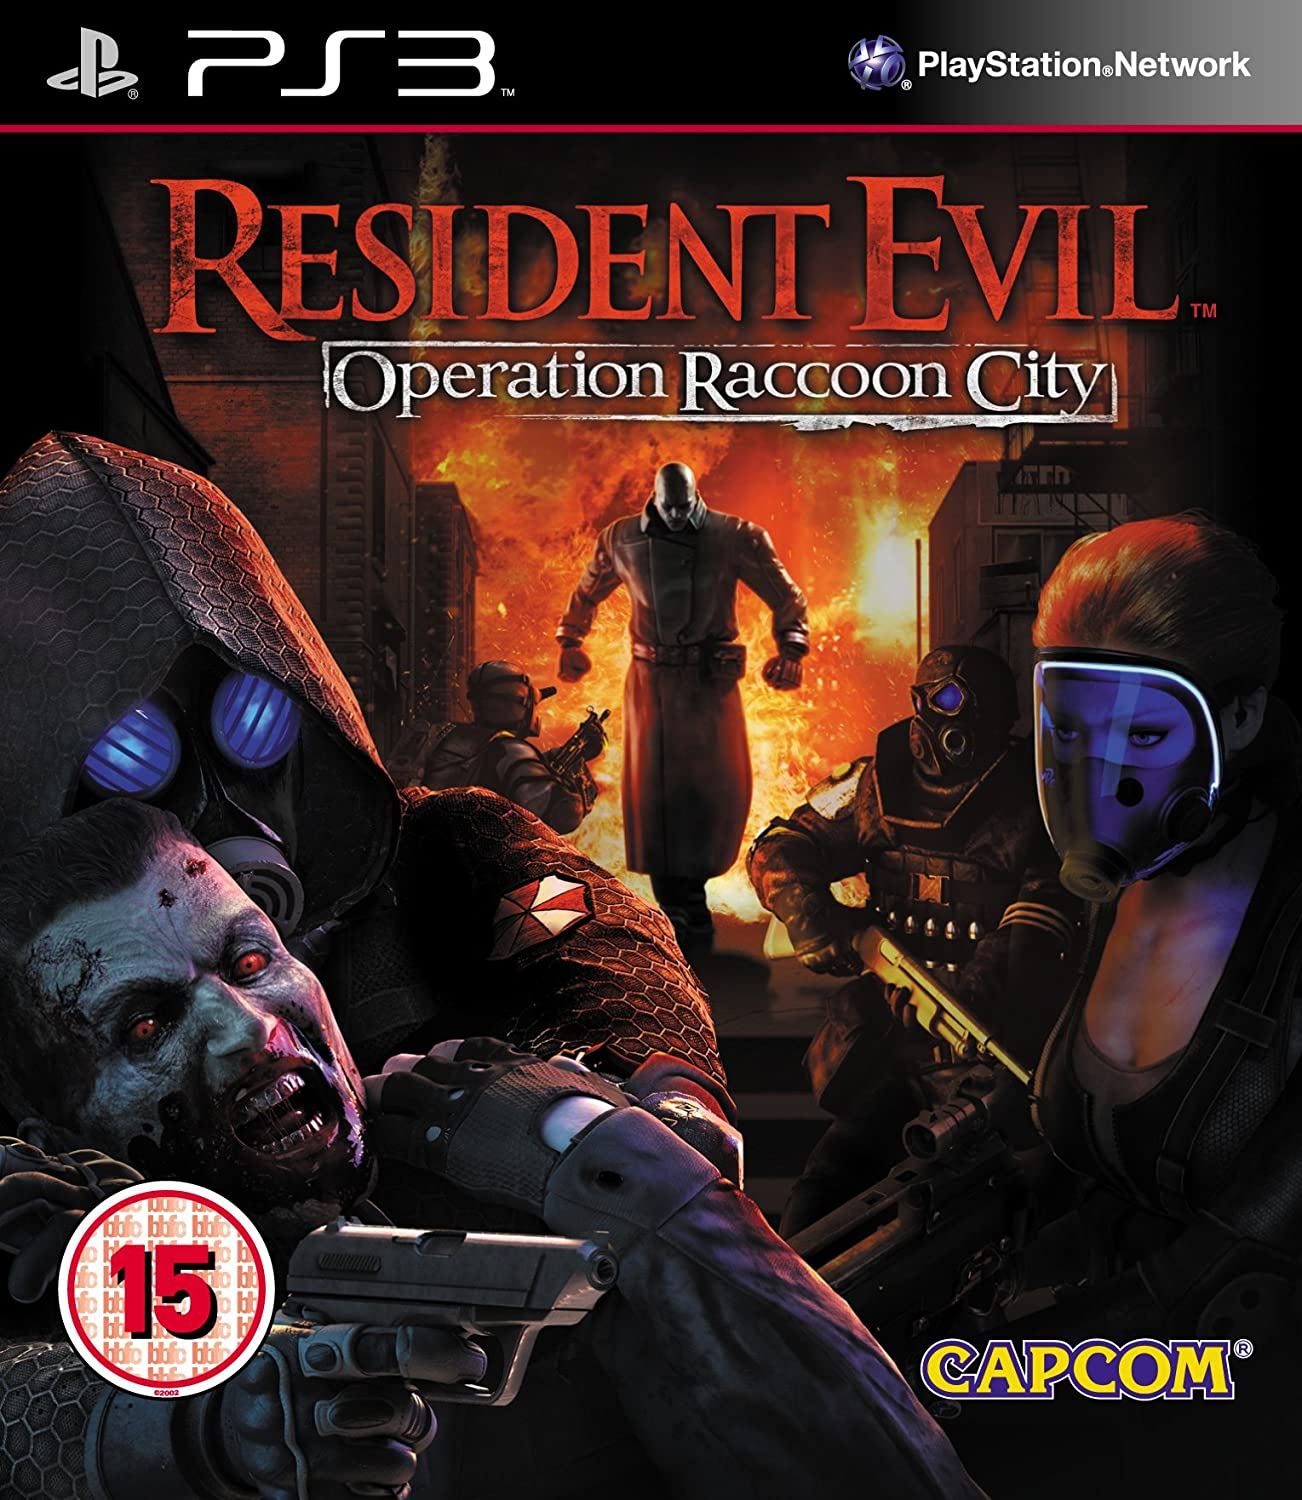 Resident Evil Operation Raccoon City for PlayStation 3